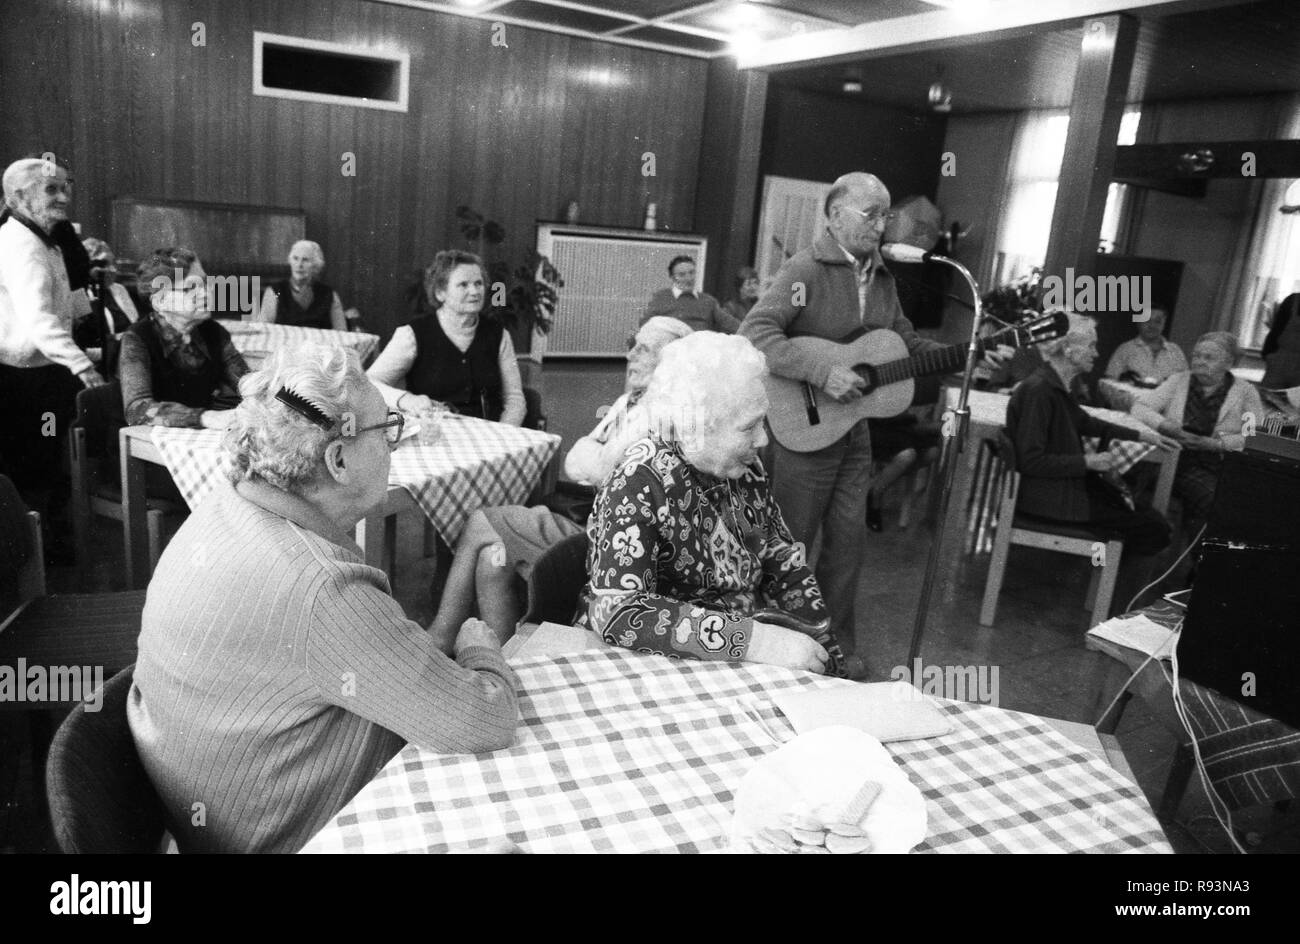 Members of the Senioren-Schutz-Bund (Senior Protection Federation), also known as 'Graue Panther' (Grey Panther), entertain the residents of a retirement home in Hagen on 17 March 1980. | usage worldwide Stock Photo